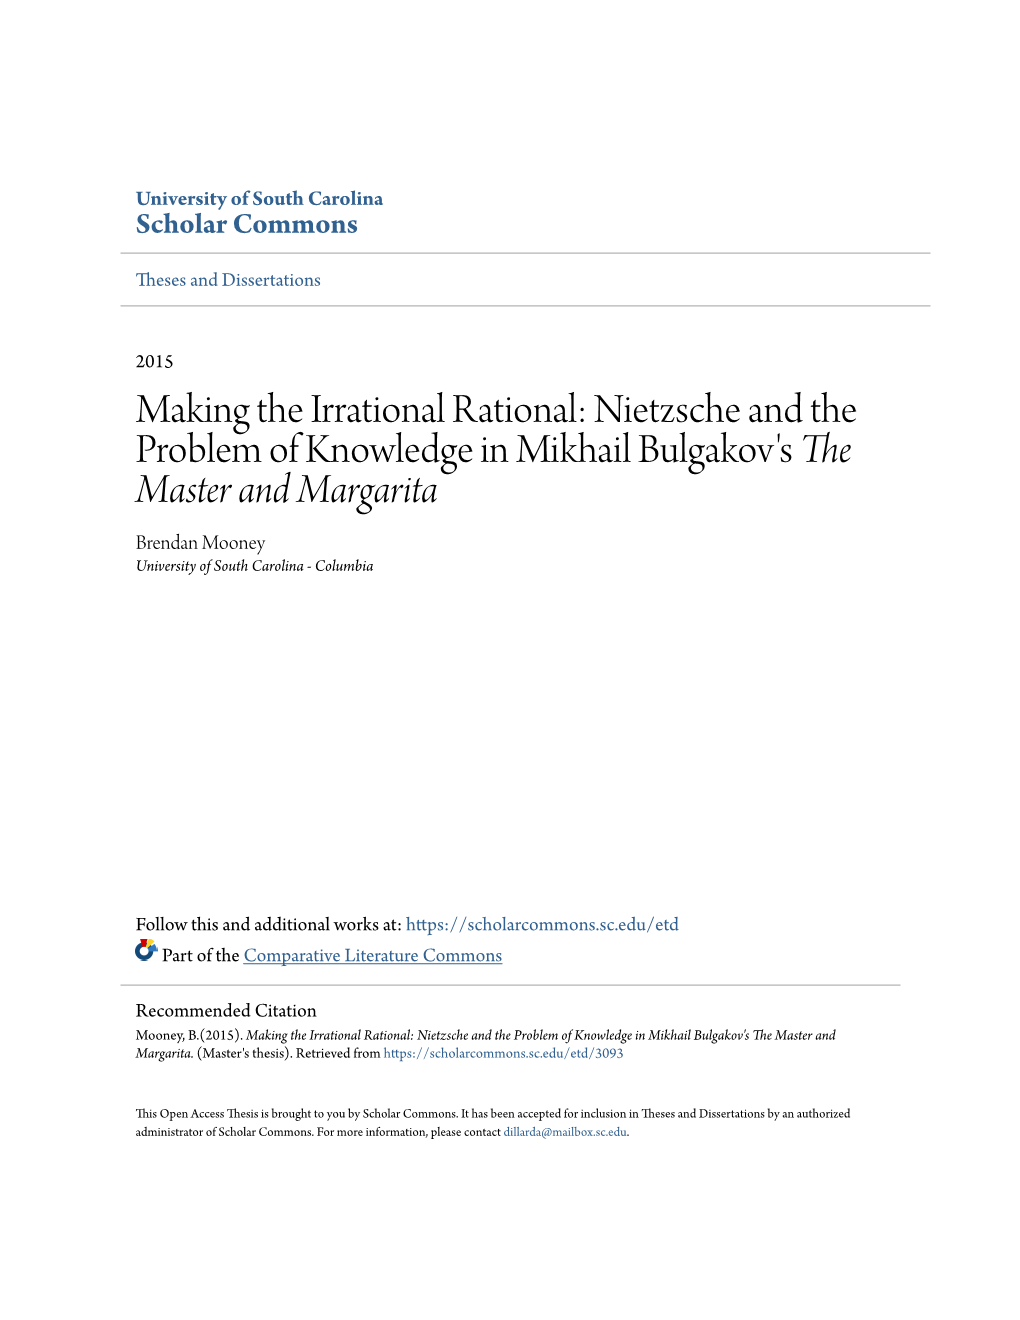 Making the Irrational Rational: Nietzsche and the Problem of Knowledge in Mikhail Bulgakov's